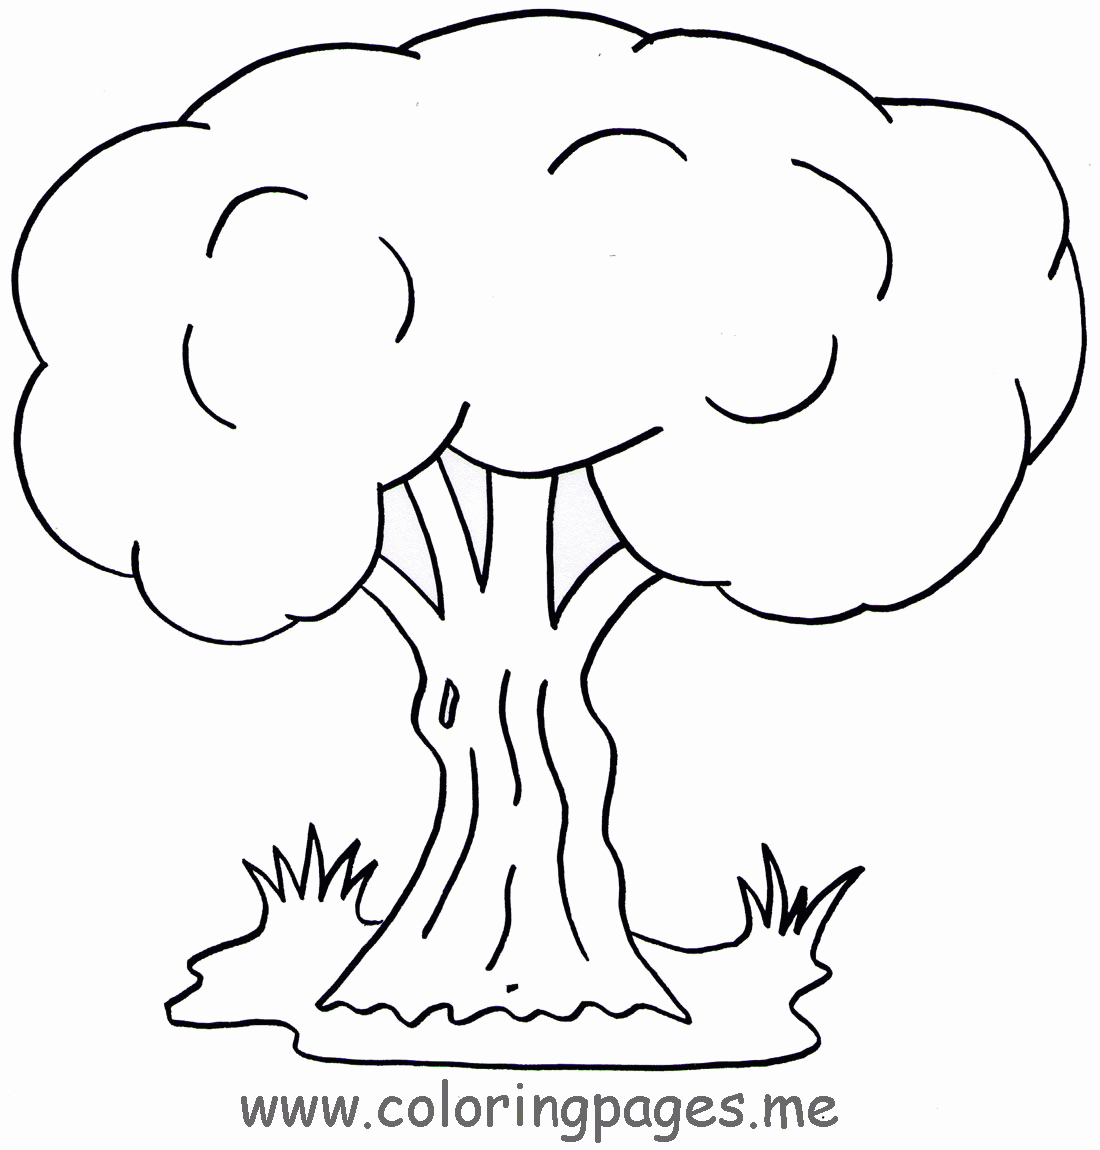 Trees - Coloring Pages for Kids and for Adults